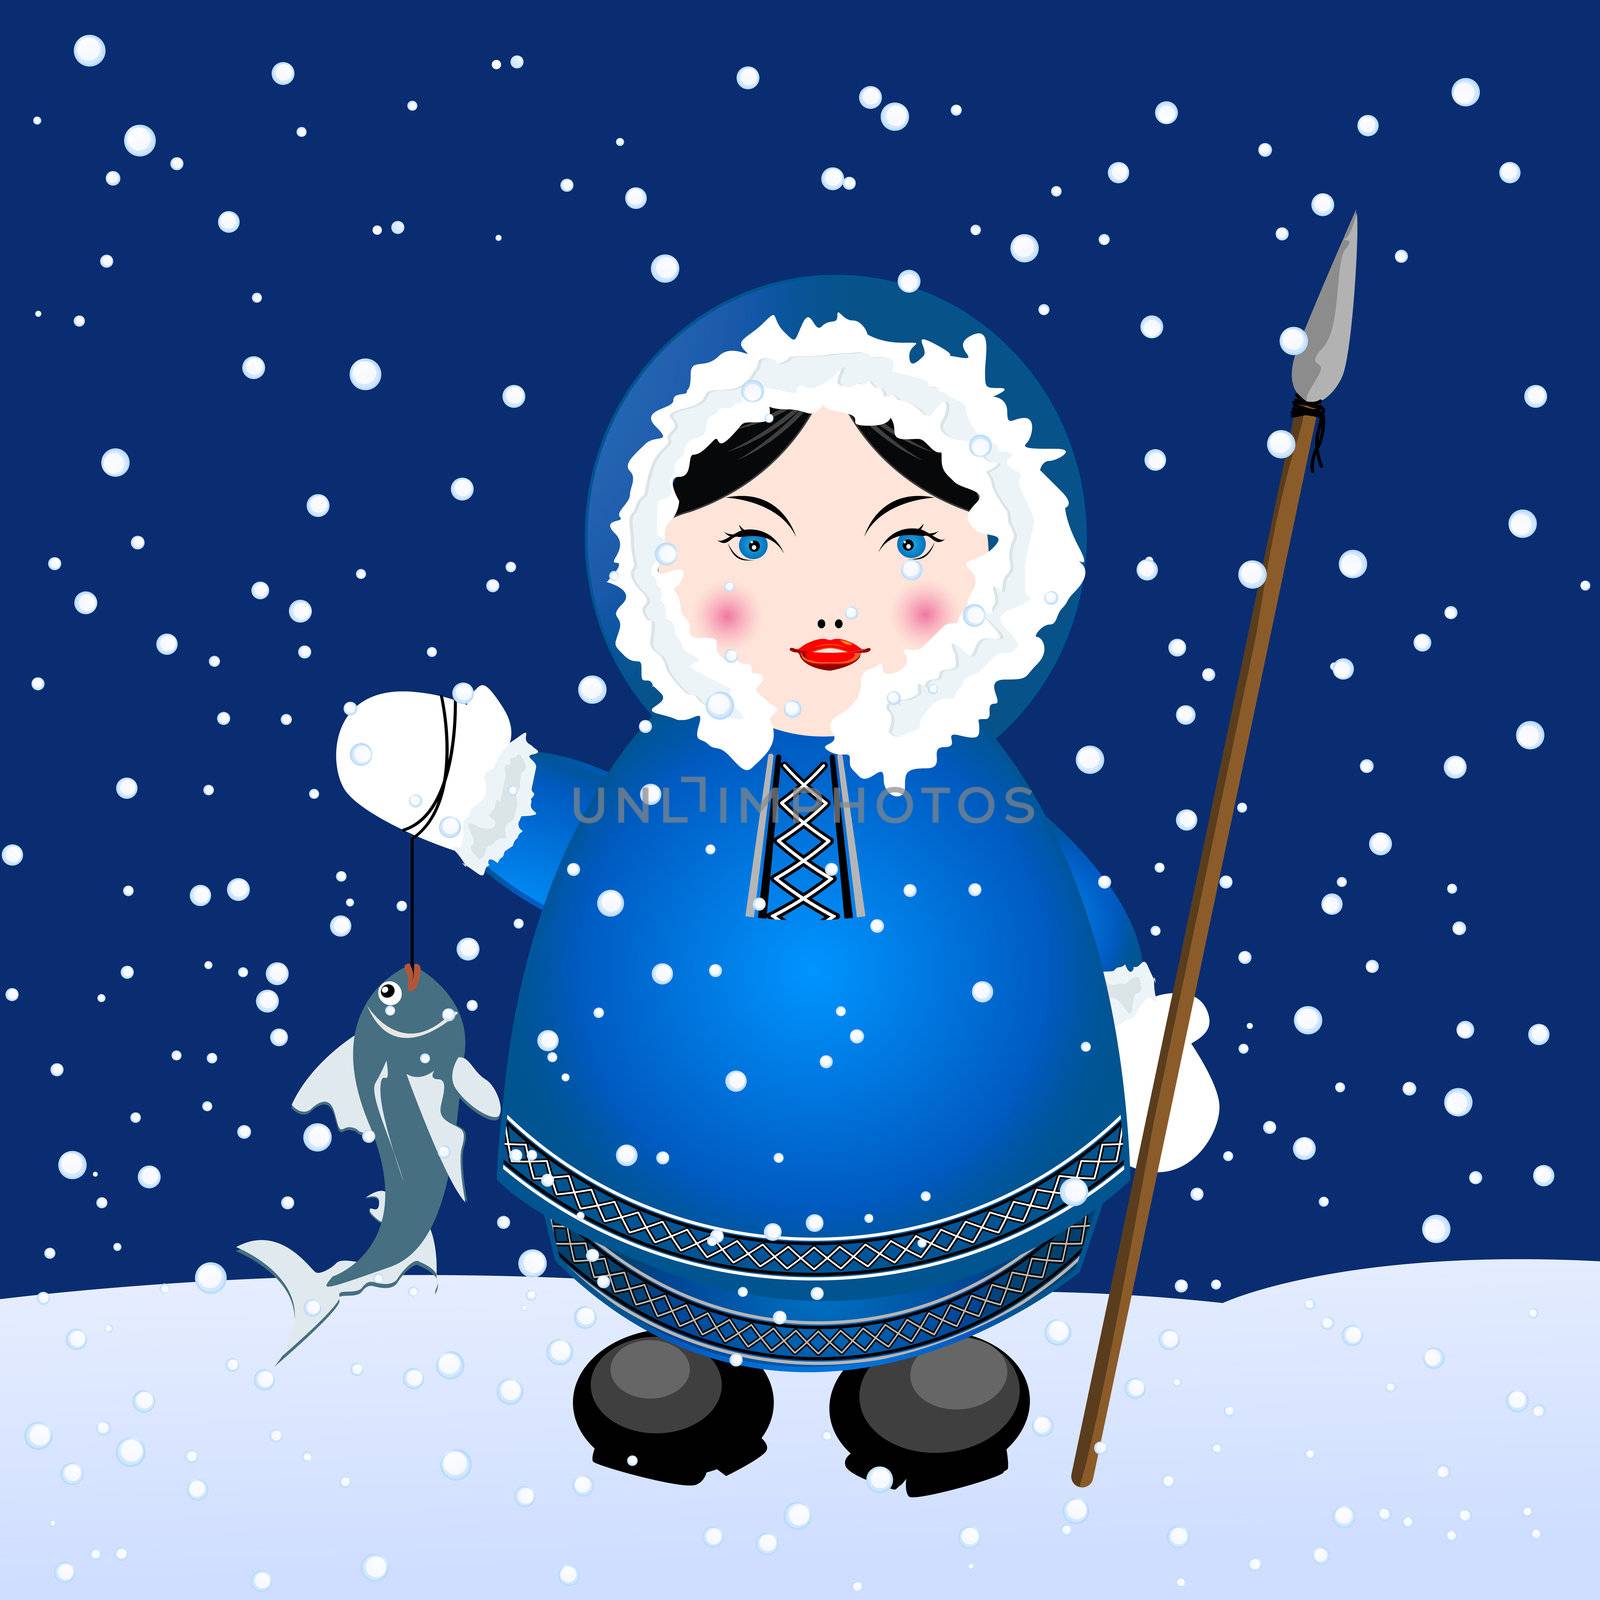 Cartoon eskimo girl with spear and caught fish over a snowing winter background